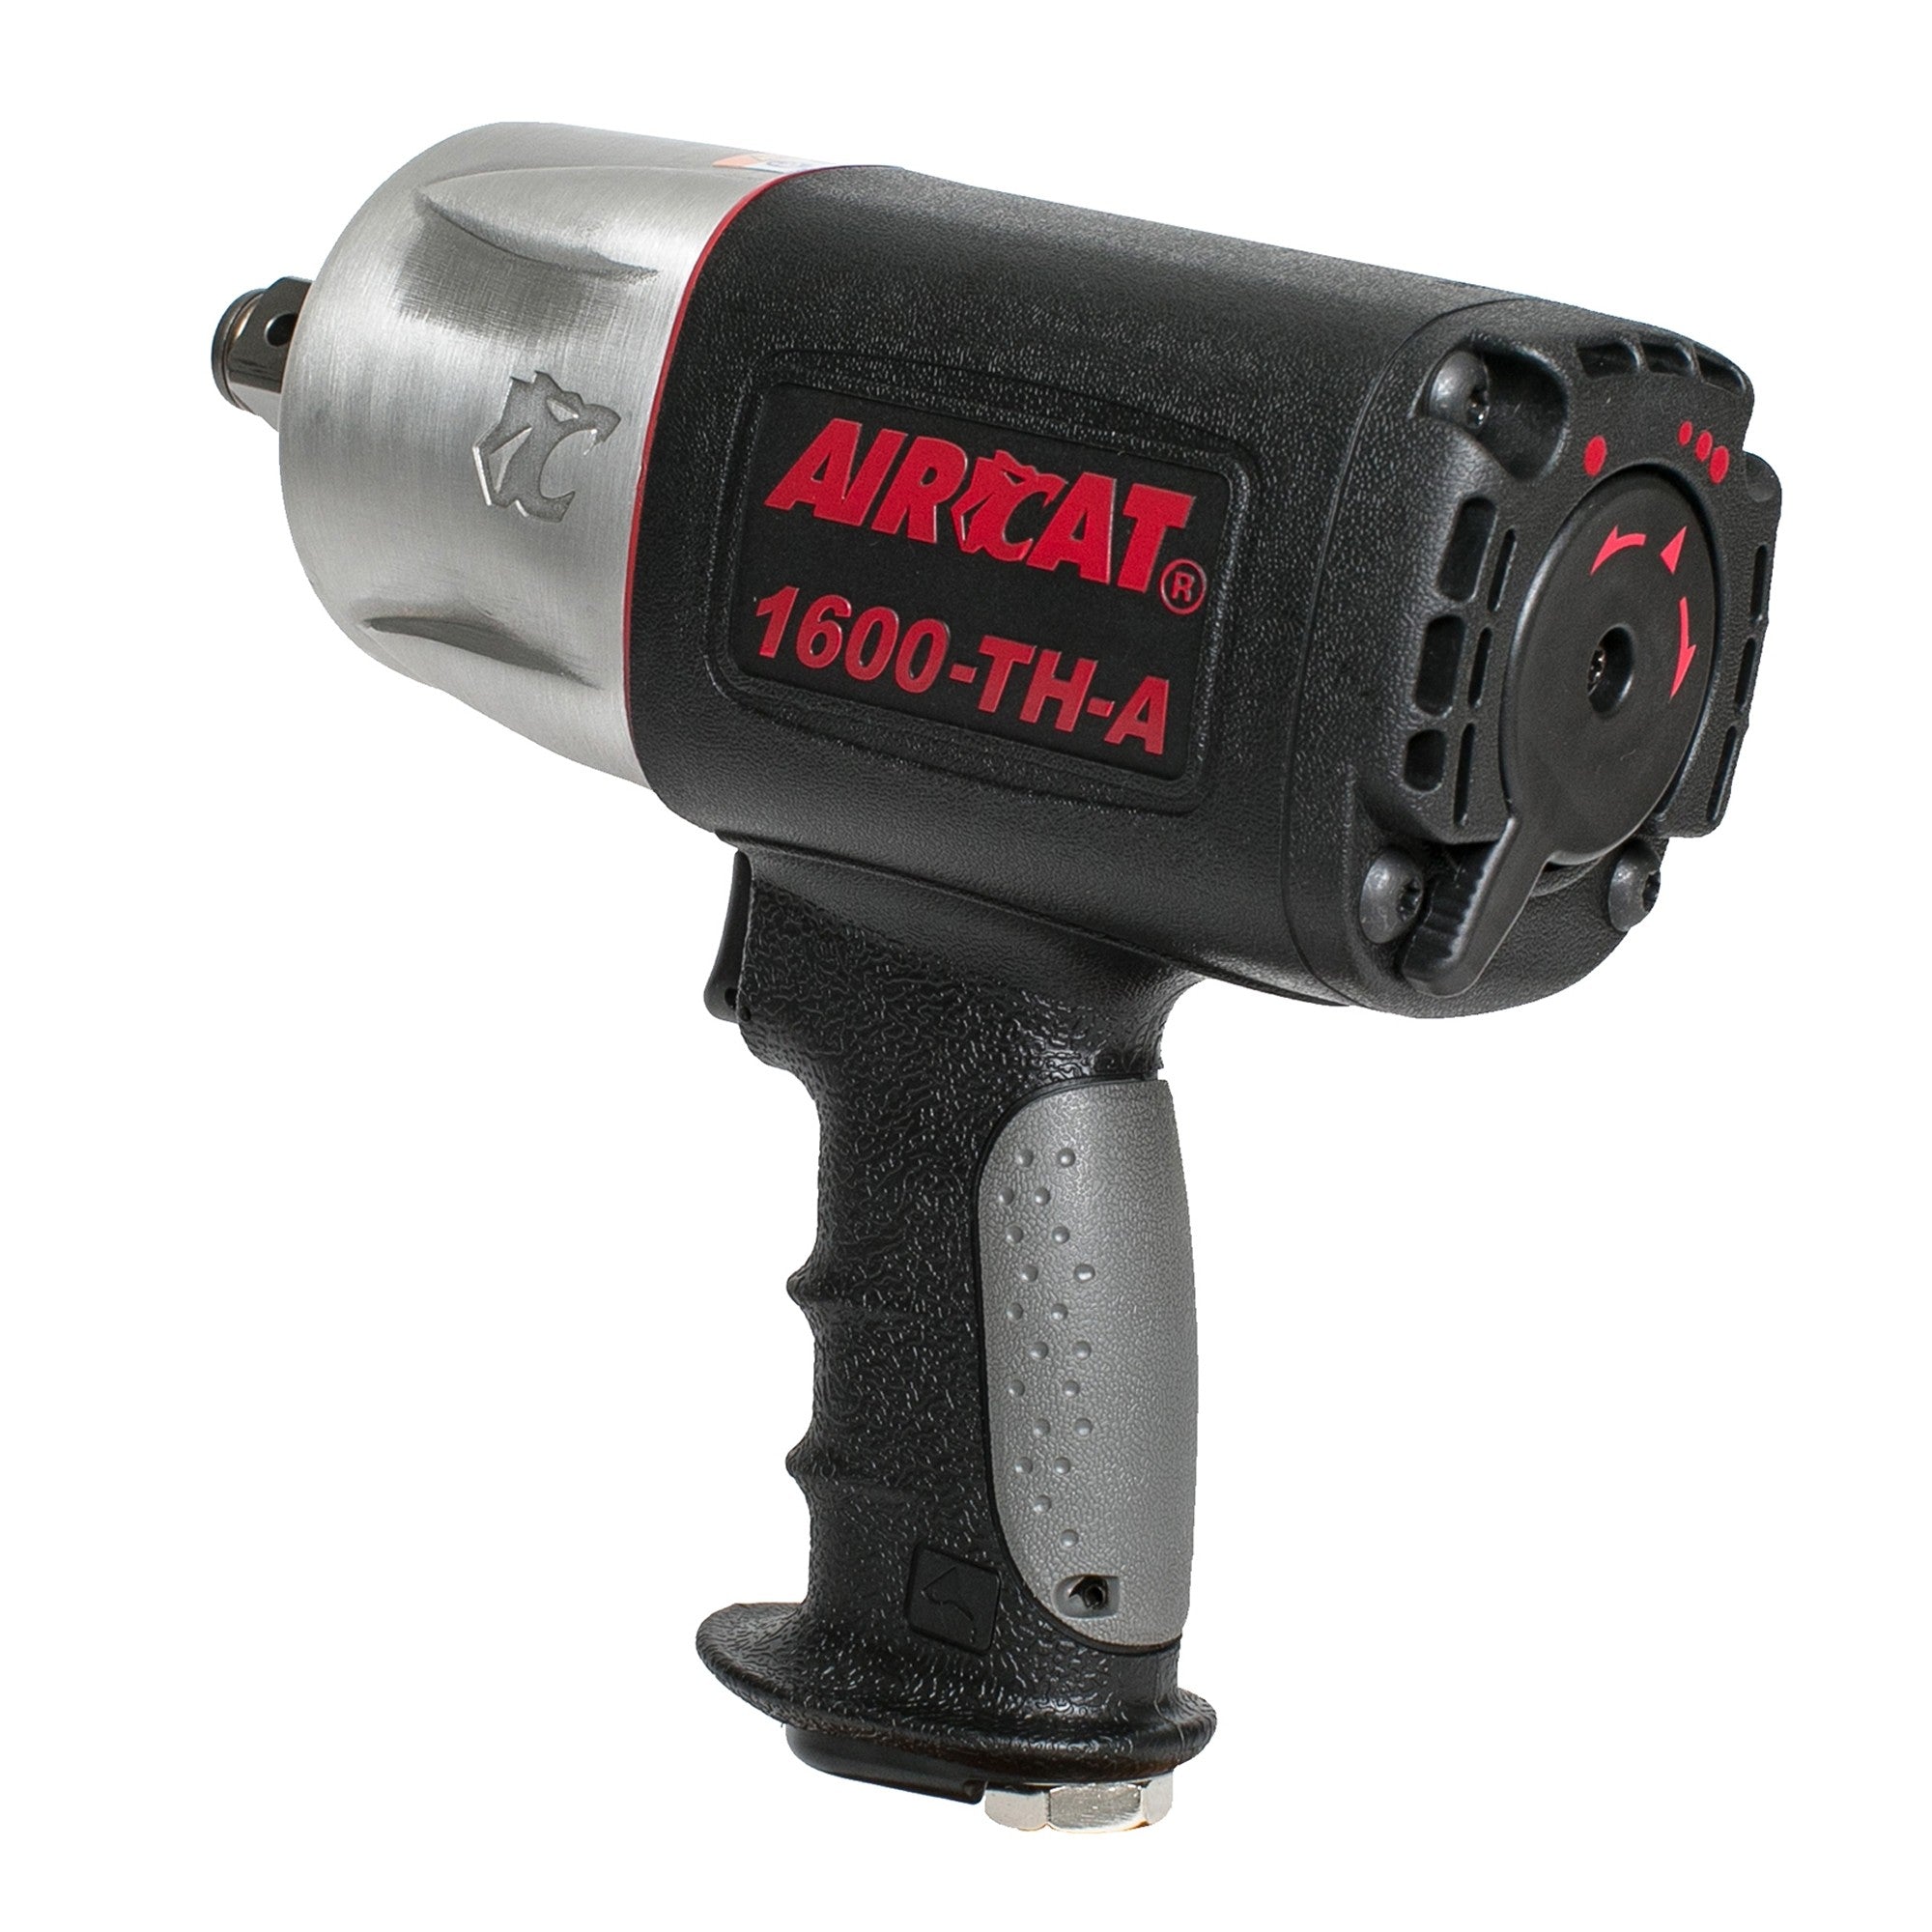 AIRCAT 3/4" Super Duty Impact Wrench ARC1600-TH-A - Direct Tool Source